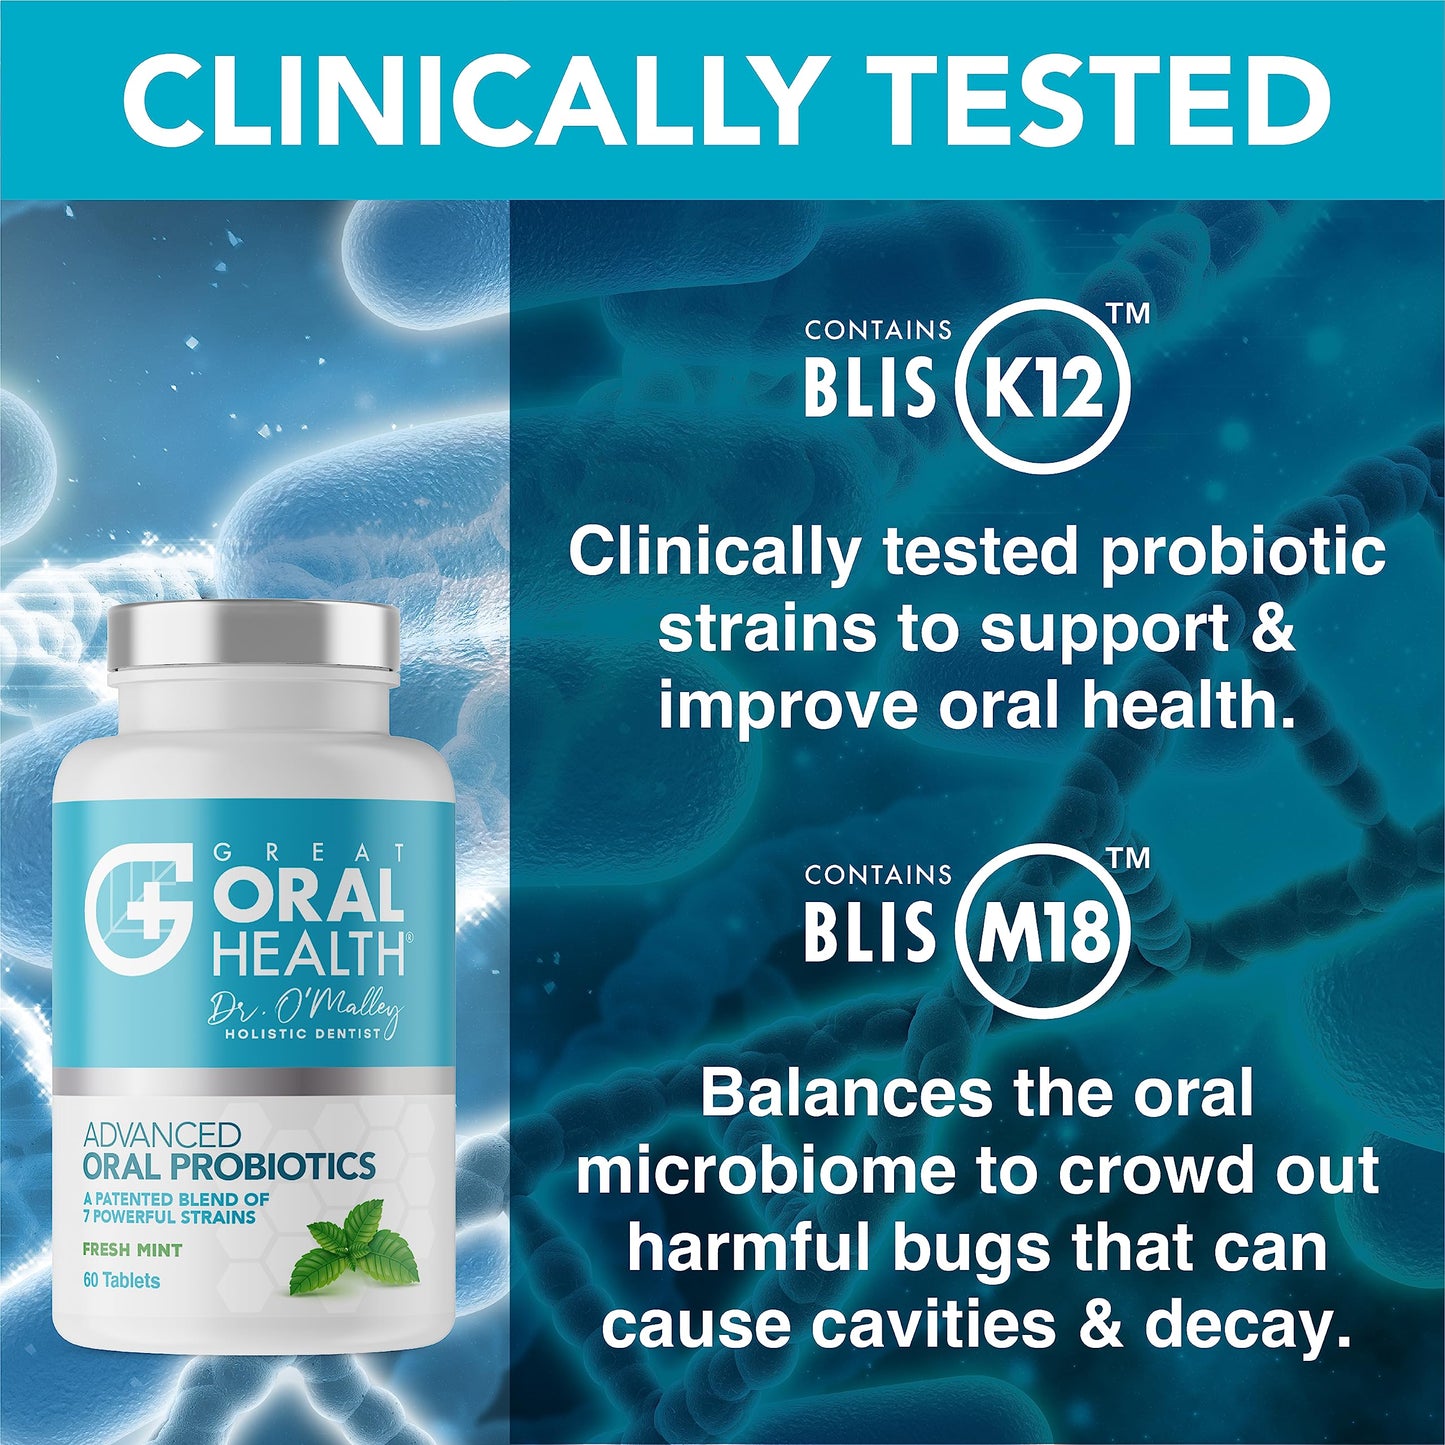 Chewable Oral Probiotics~Dentist Formulated 60 Tablet Bottle~Attack Bad Breath, Cavities And Gum Disease ~ Bad Breath Treatment ~Contains BLIS M18 and BLIS K12~Mint Flavor~83 Page eBook Included!